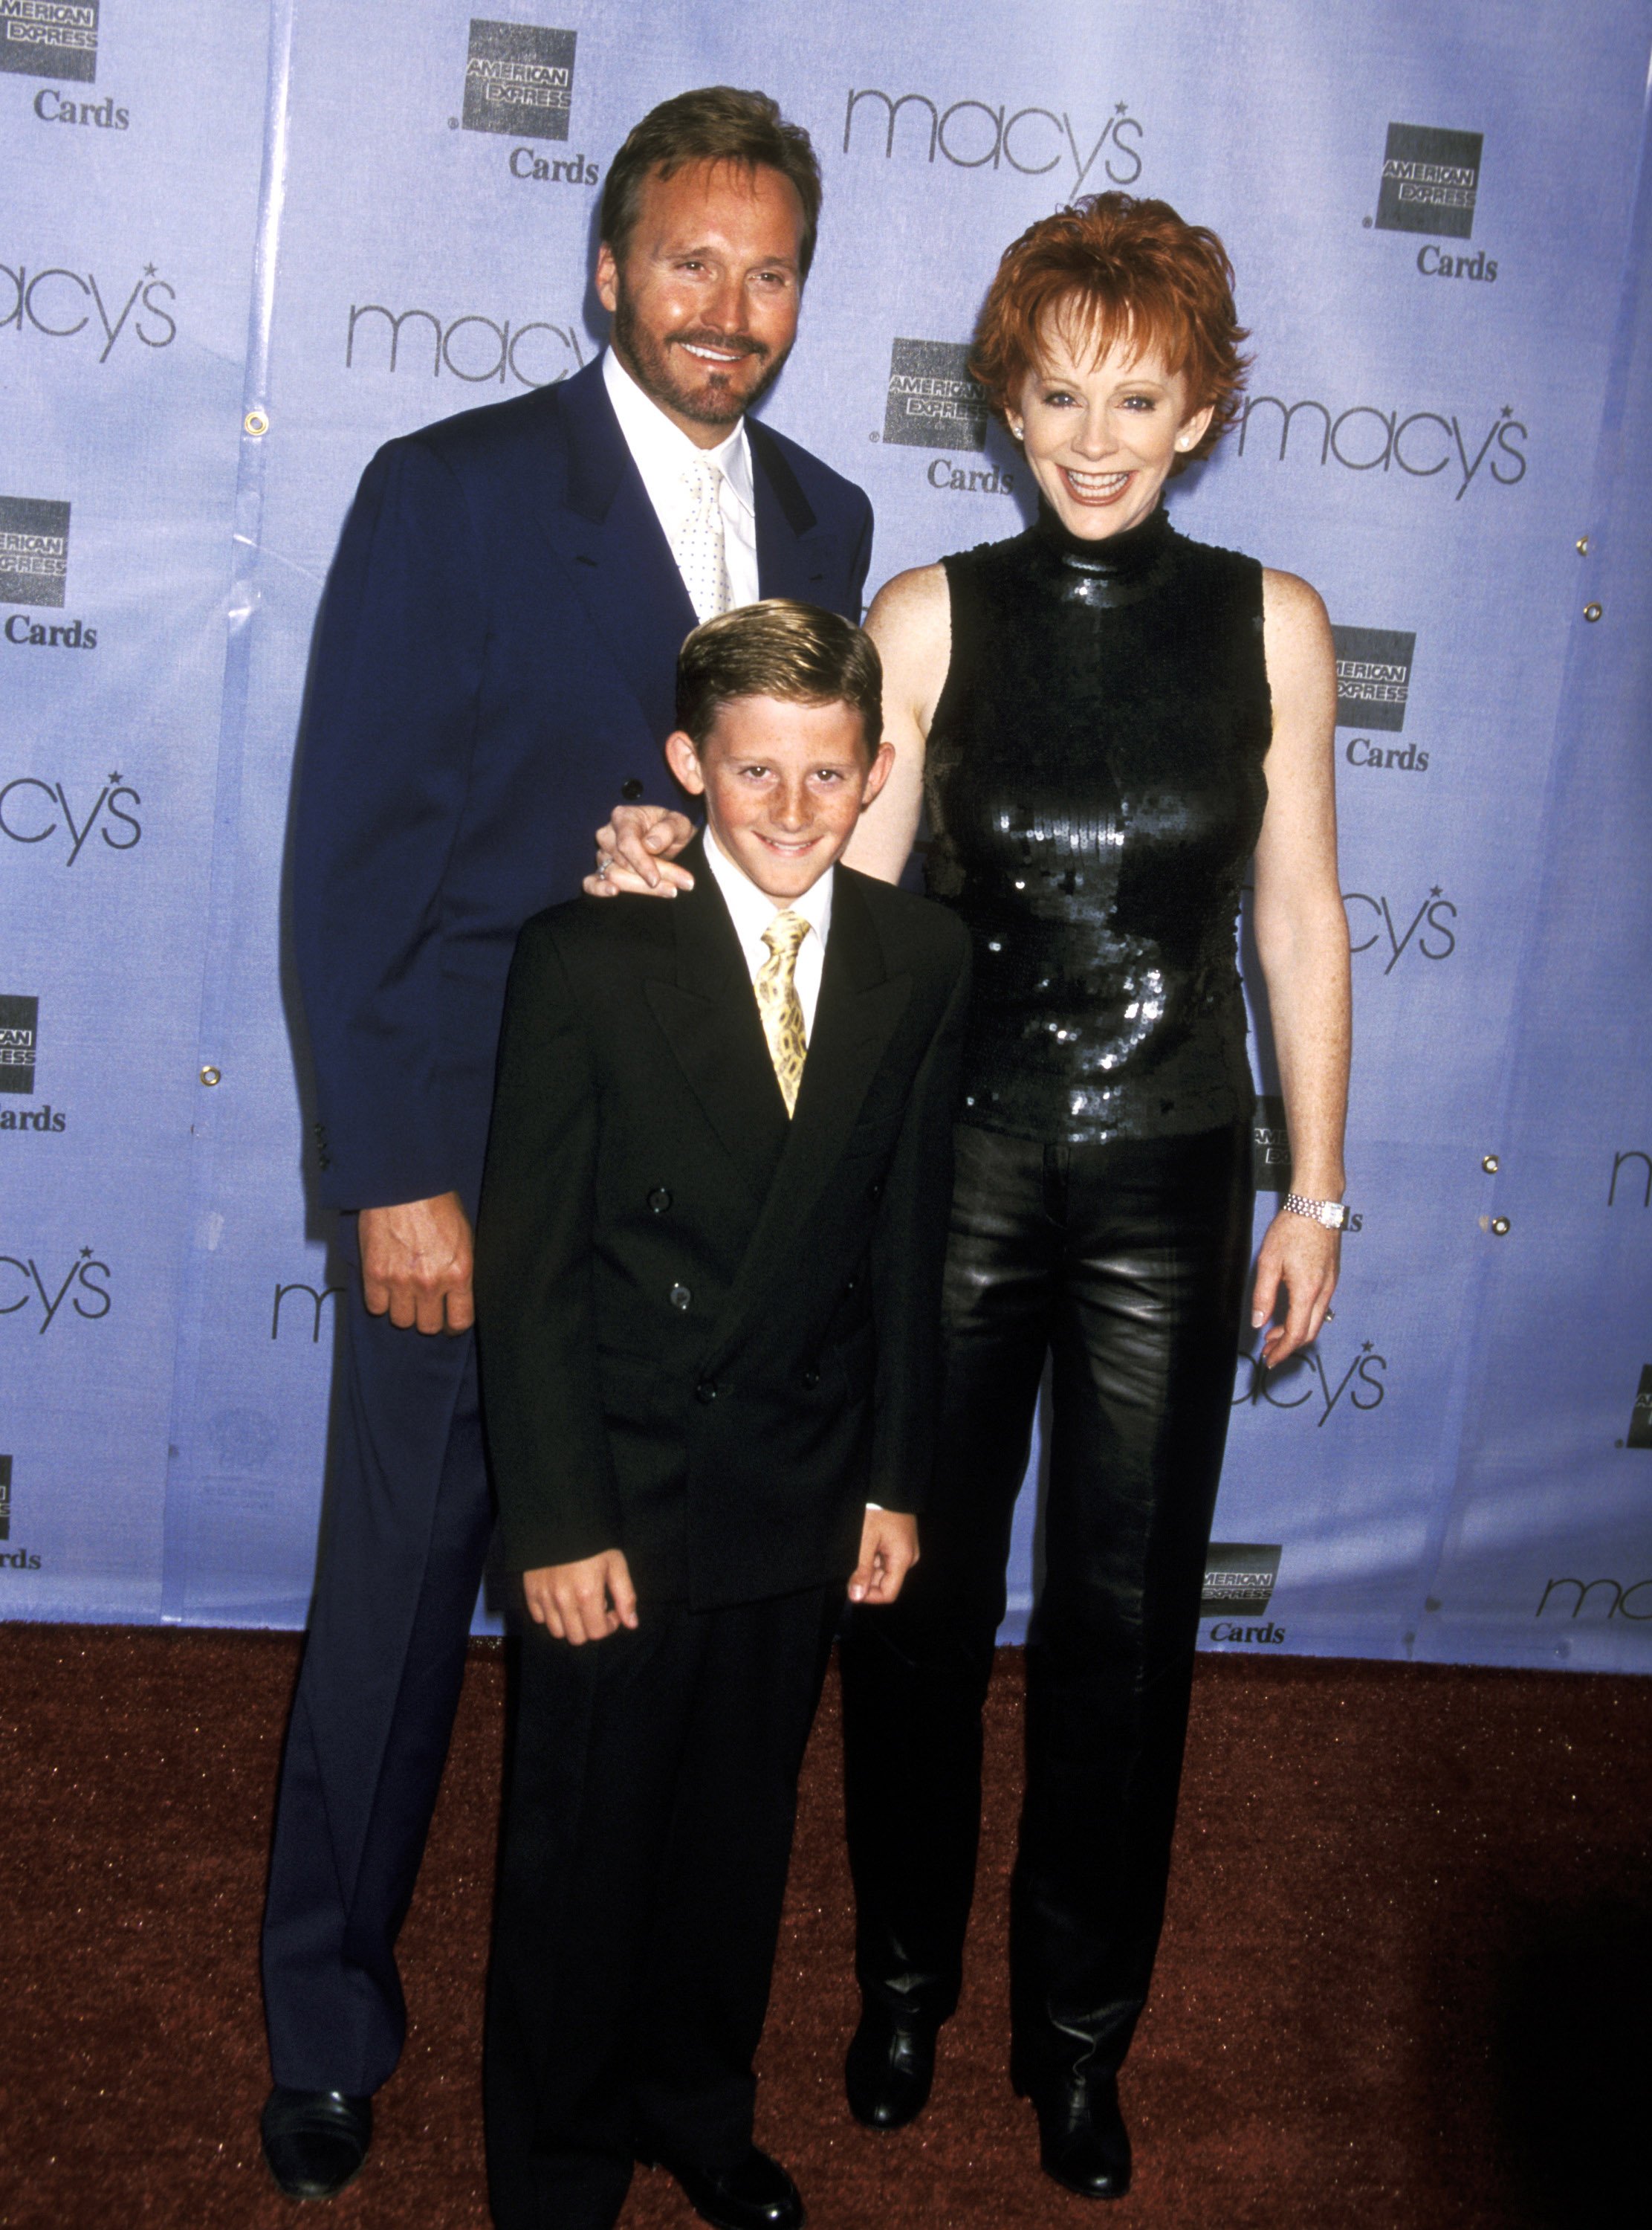 Narvel Blackstock, Shelby Blackstock, and Reba McEntire at the Passport '01 20 Years of AIDS, 20 Years of Hope event on September 22, 2001 | Source: Getty Images